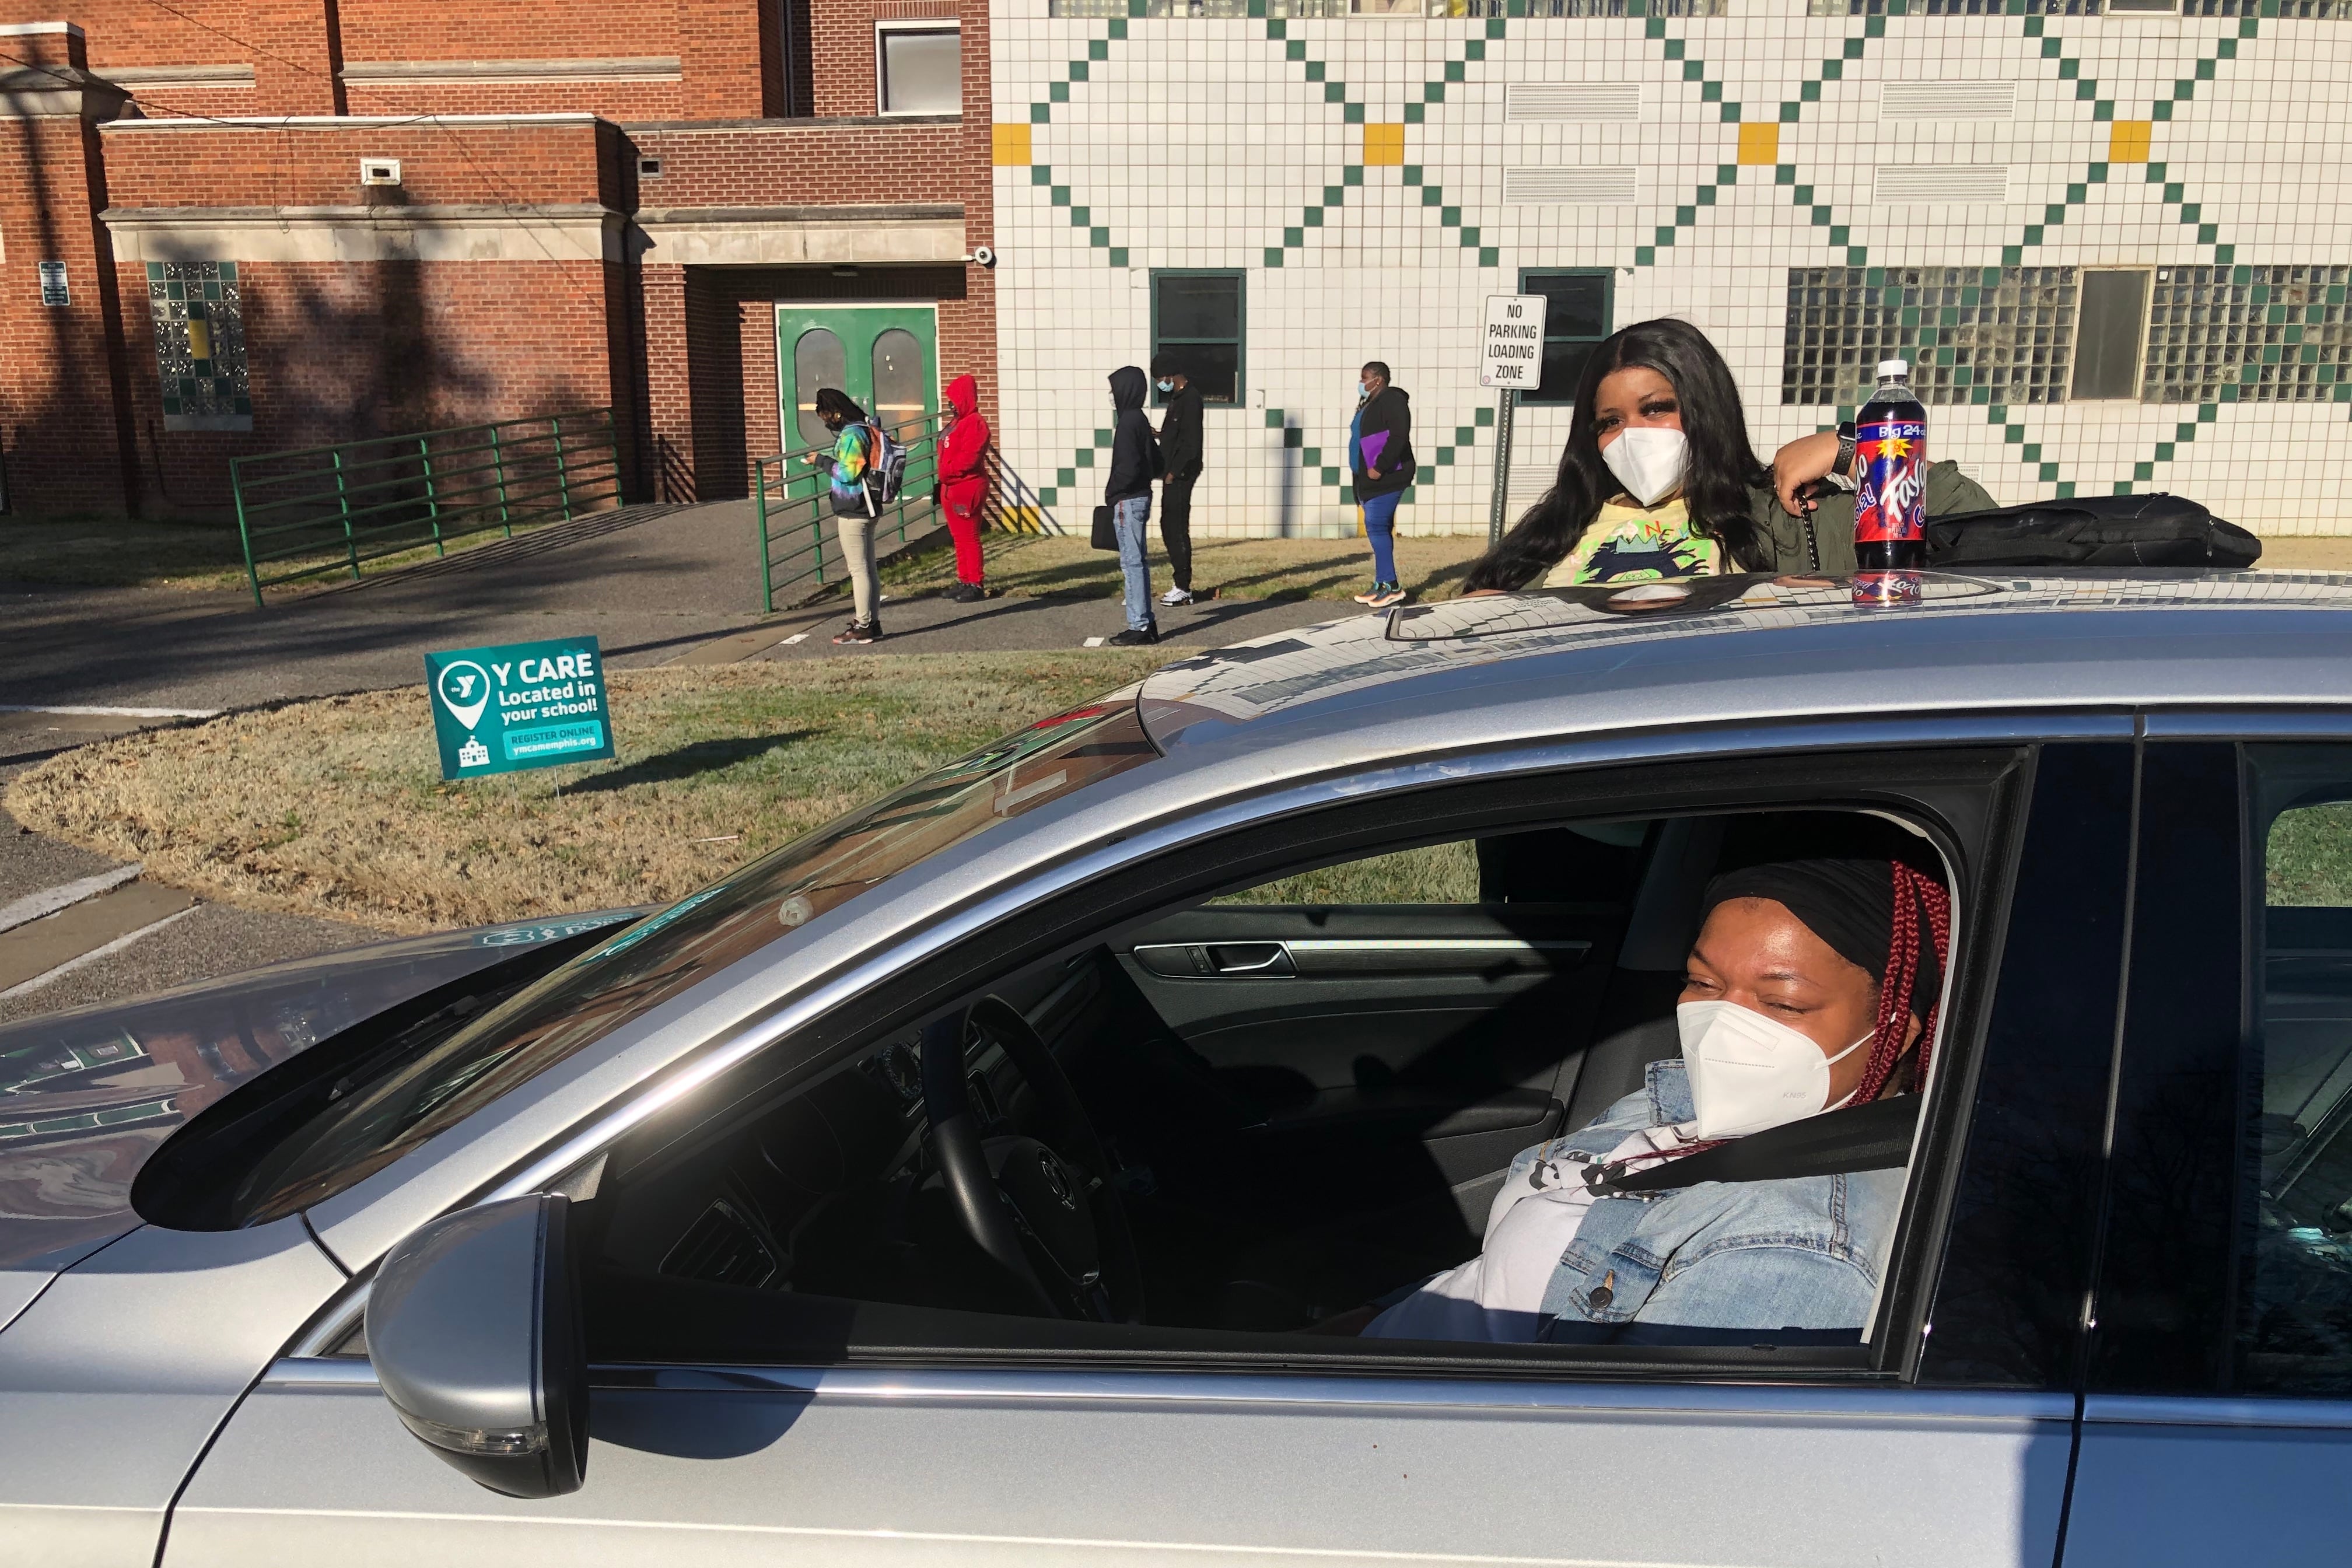 A masked parent in the driver’s seat of a car and her masked daughter exiting the car in front of the school, as students stand apart in line to enter the building.